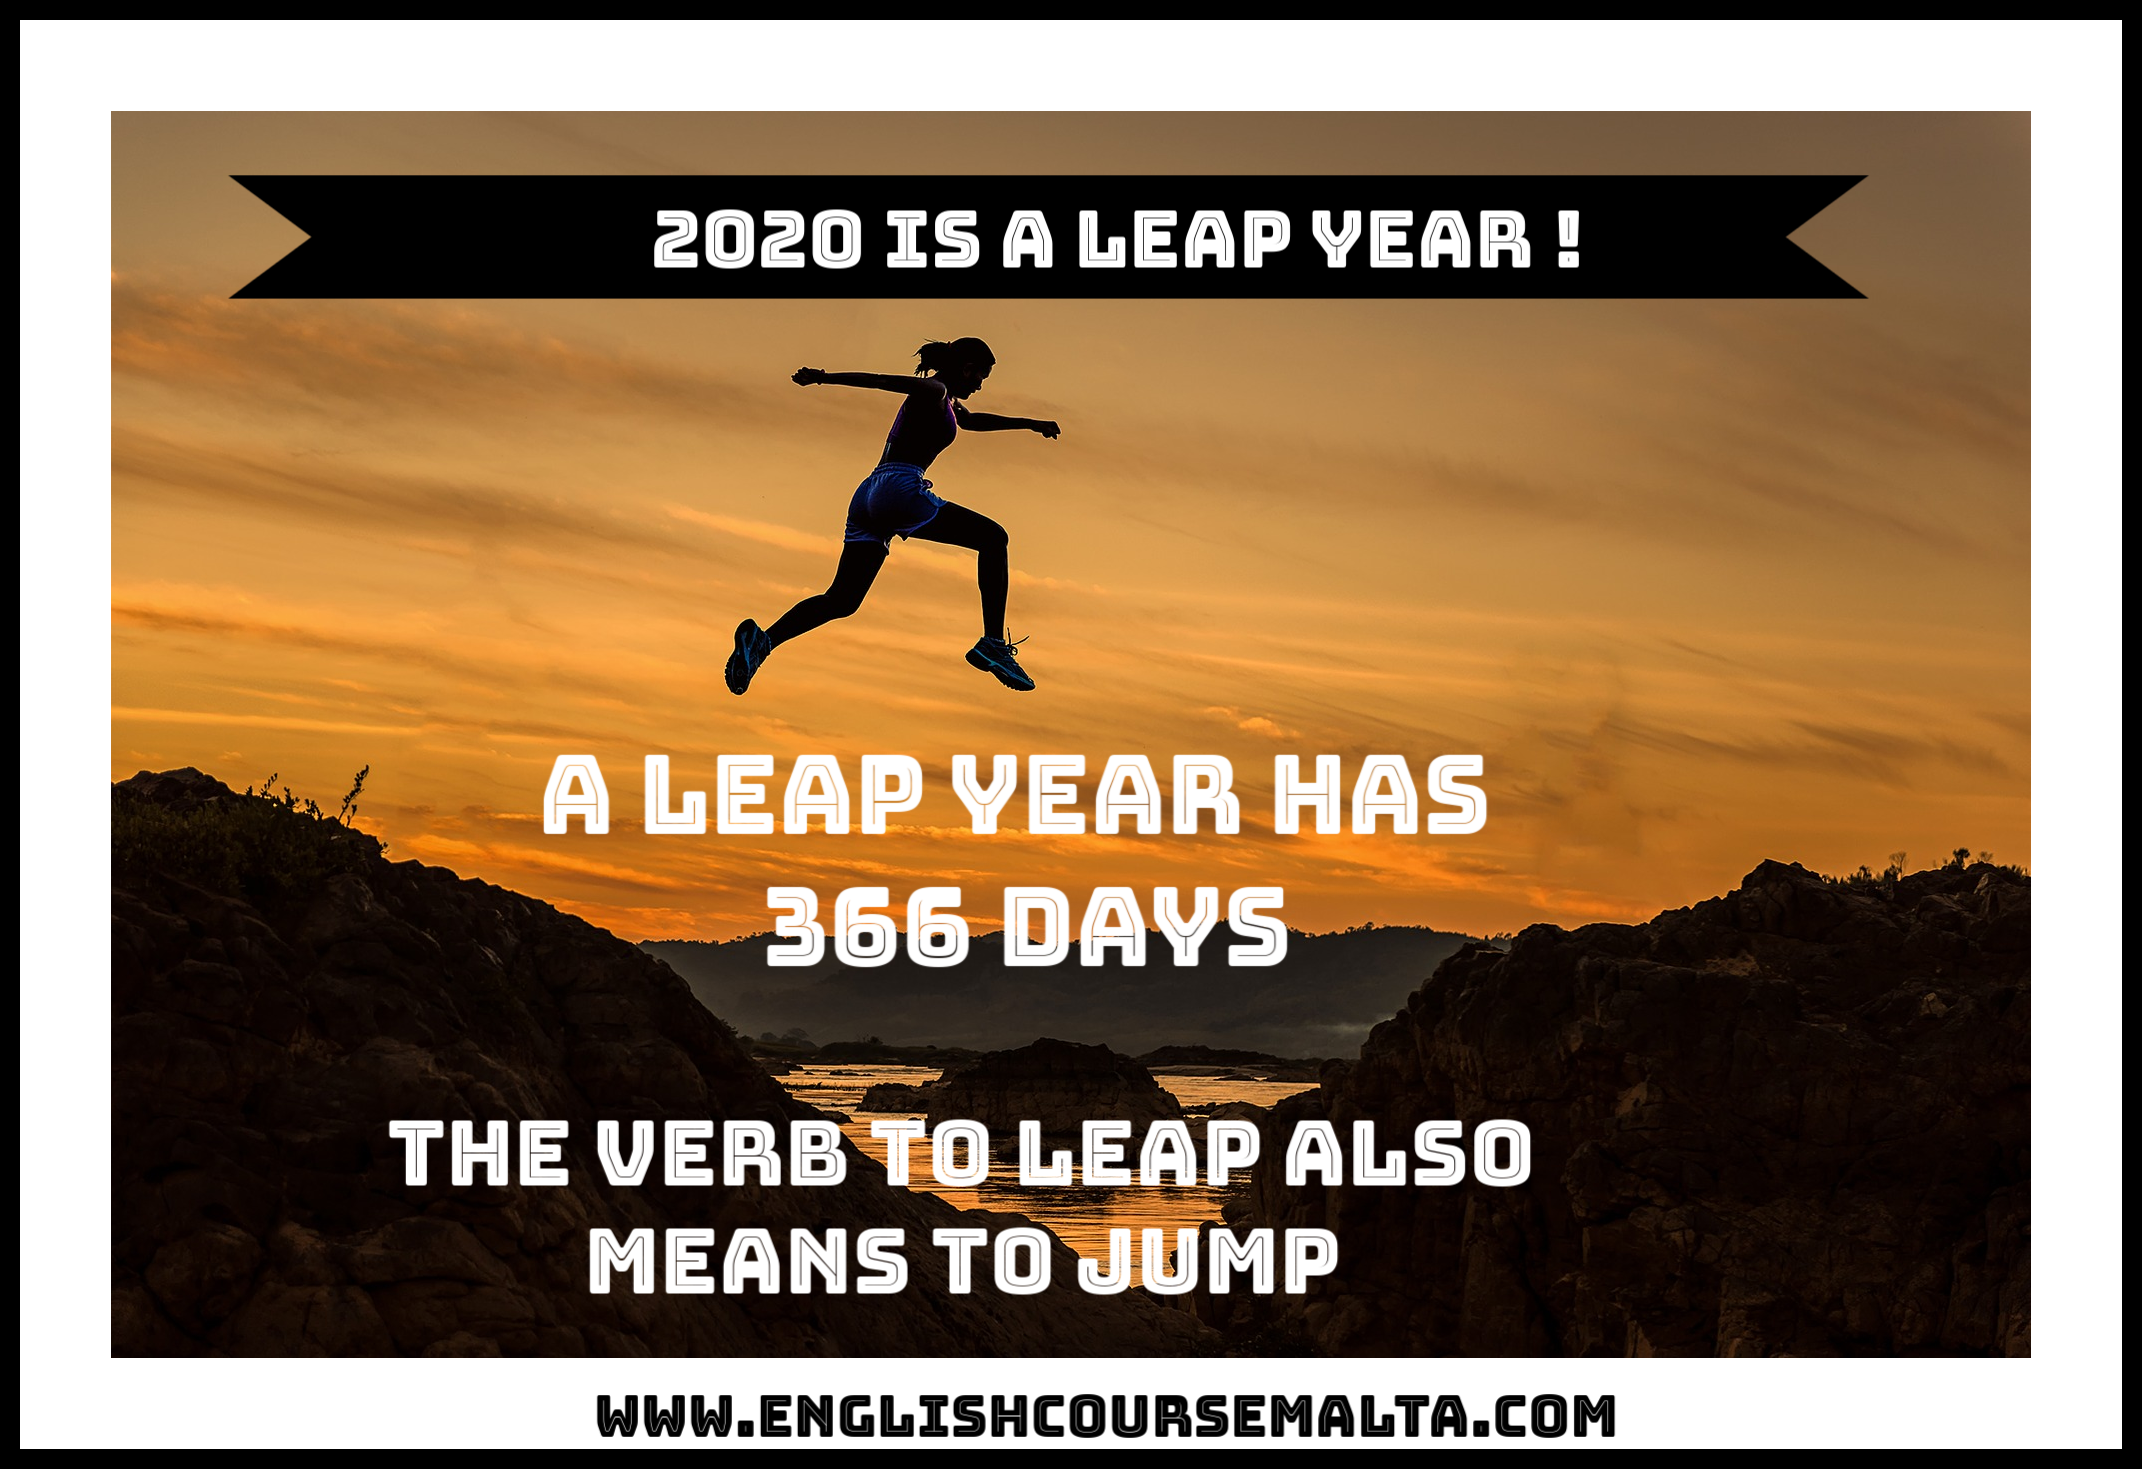 2020 IS A LEAP YEAR English Course Malta